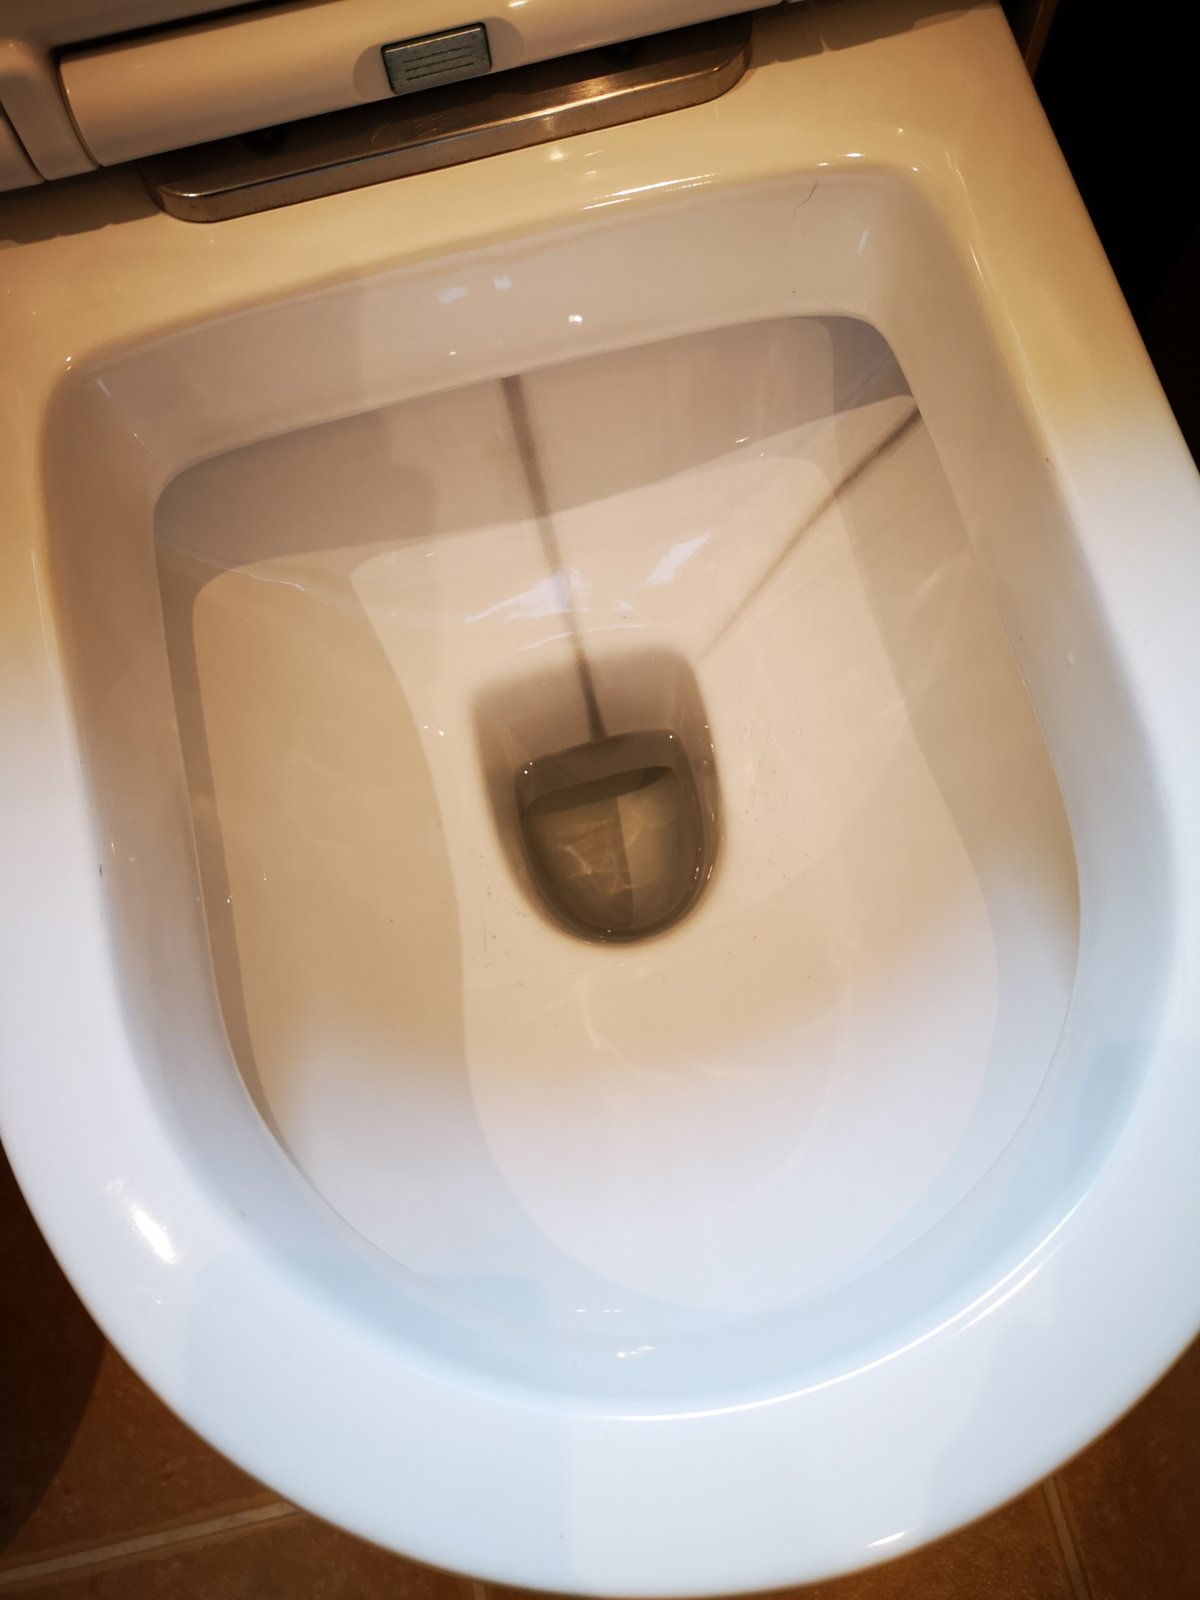 Vertical Black Lines Appeared In Toilet